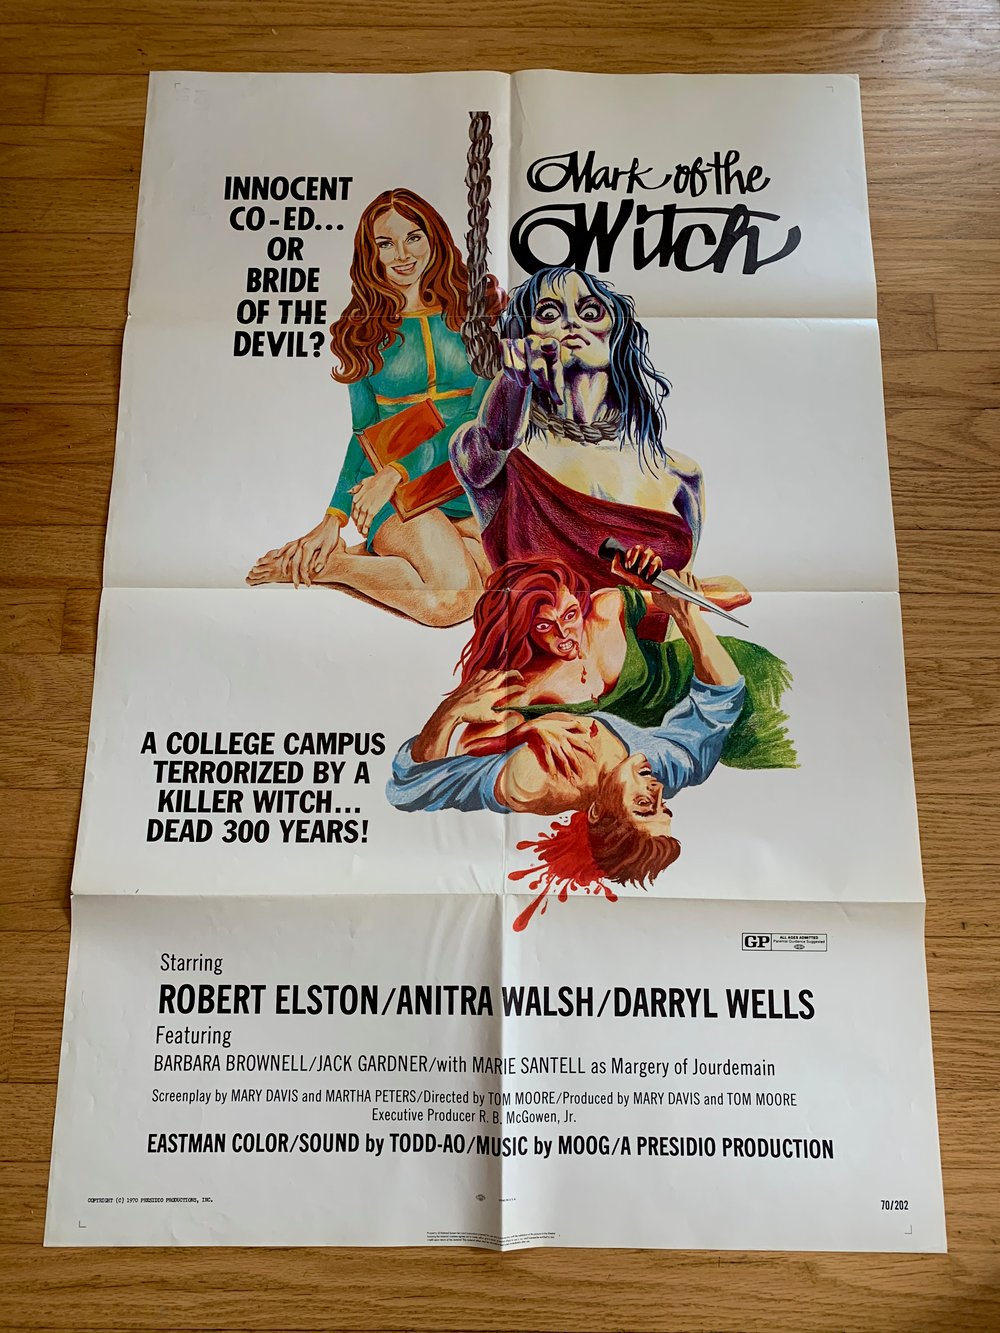 1970 MARK OF THE WITCH Original U.S. One Sheet Movie Poster